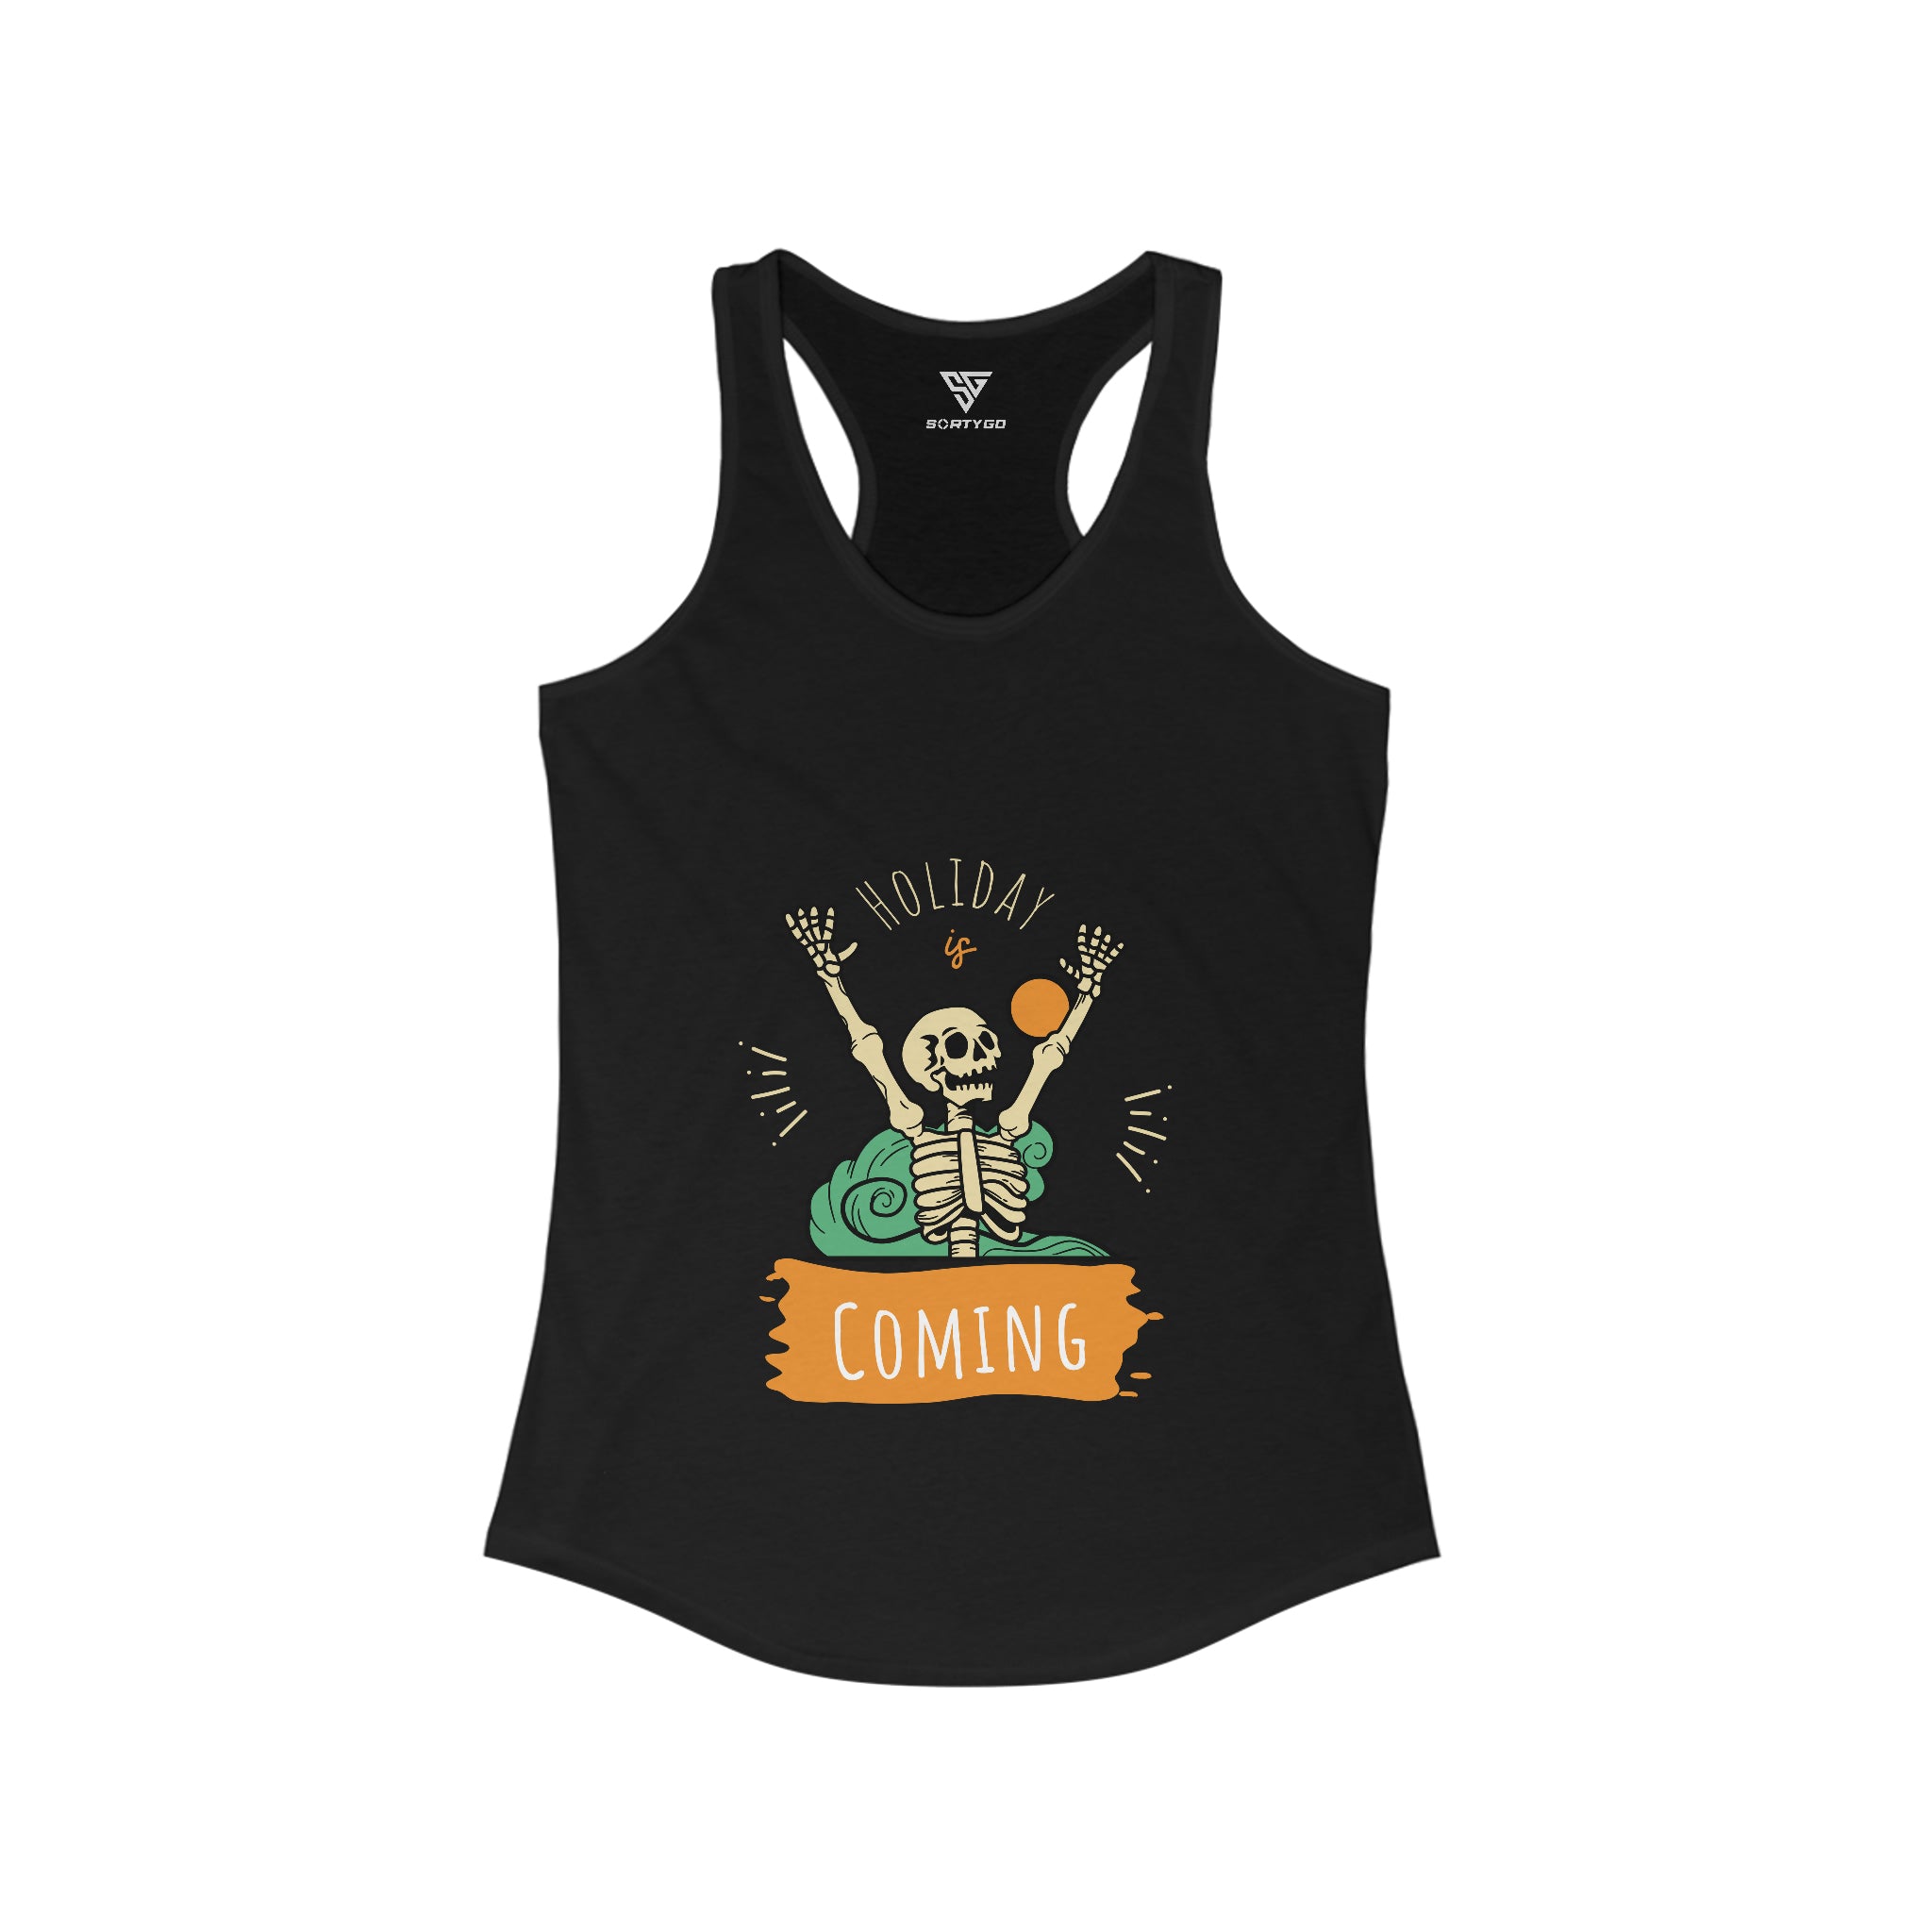 SORTYGO - Holiday is Coming Women Ideal Racerback Tank in Solid Black